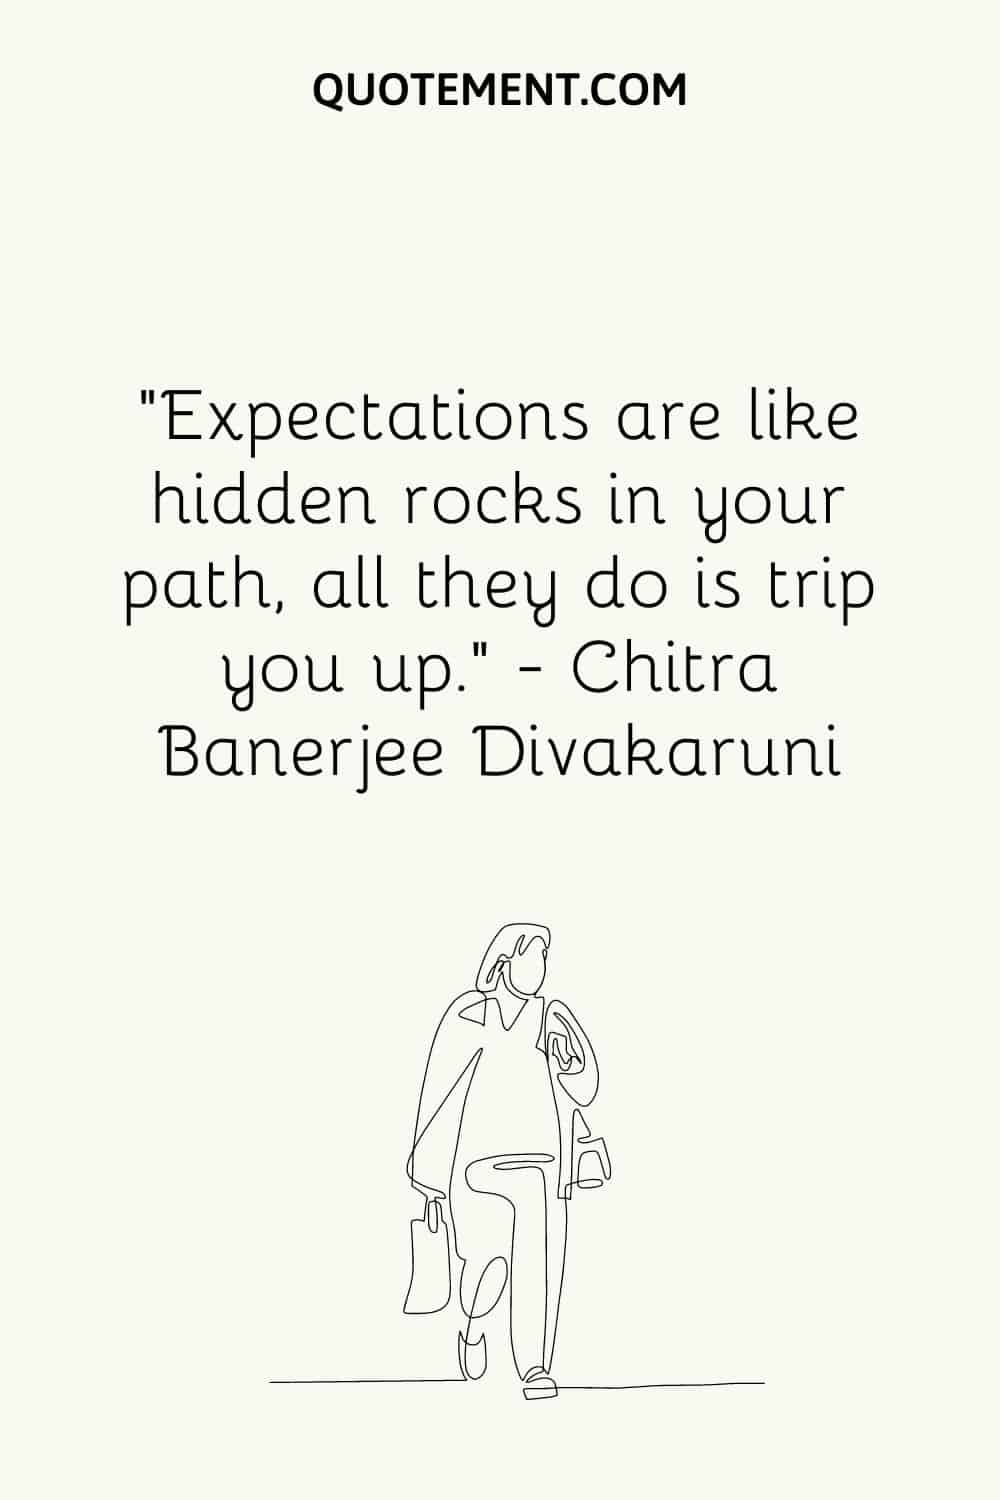 Expectations are like hidden rocks in your path, all they do is trip you up